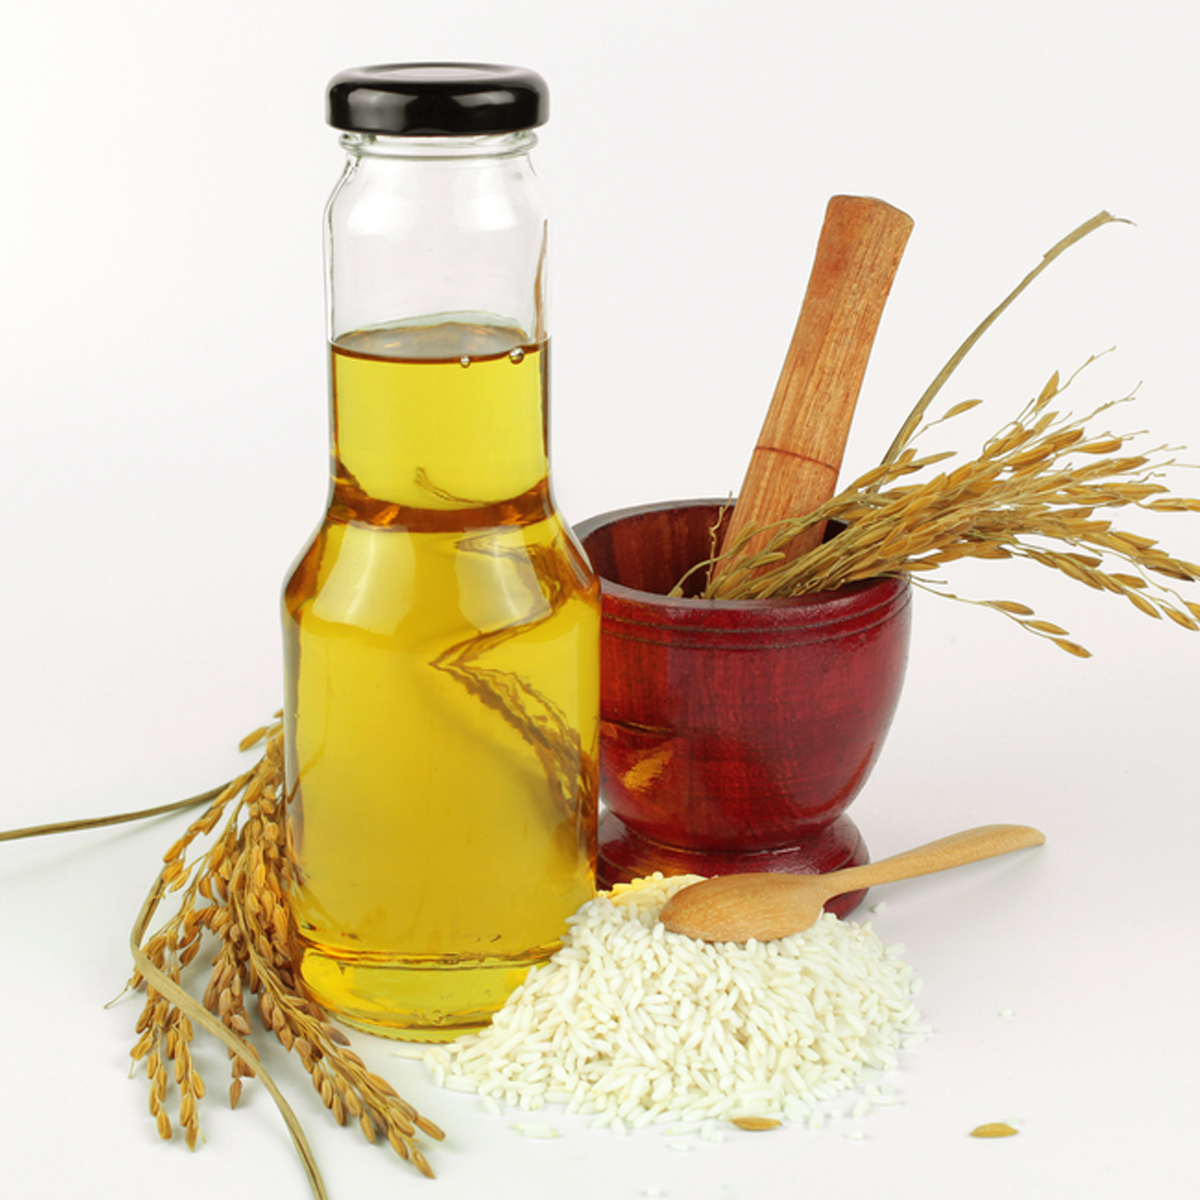 A bottle of rice bran oil sitting beside a pile of rice with a mortar and pestle in the background containing a sprig of dried bran.